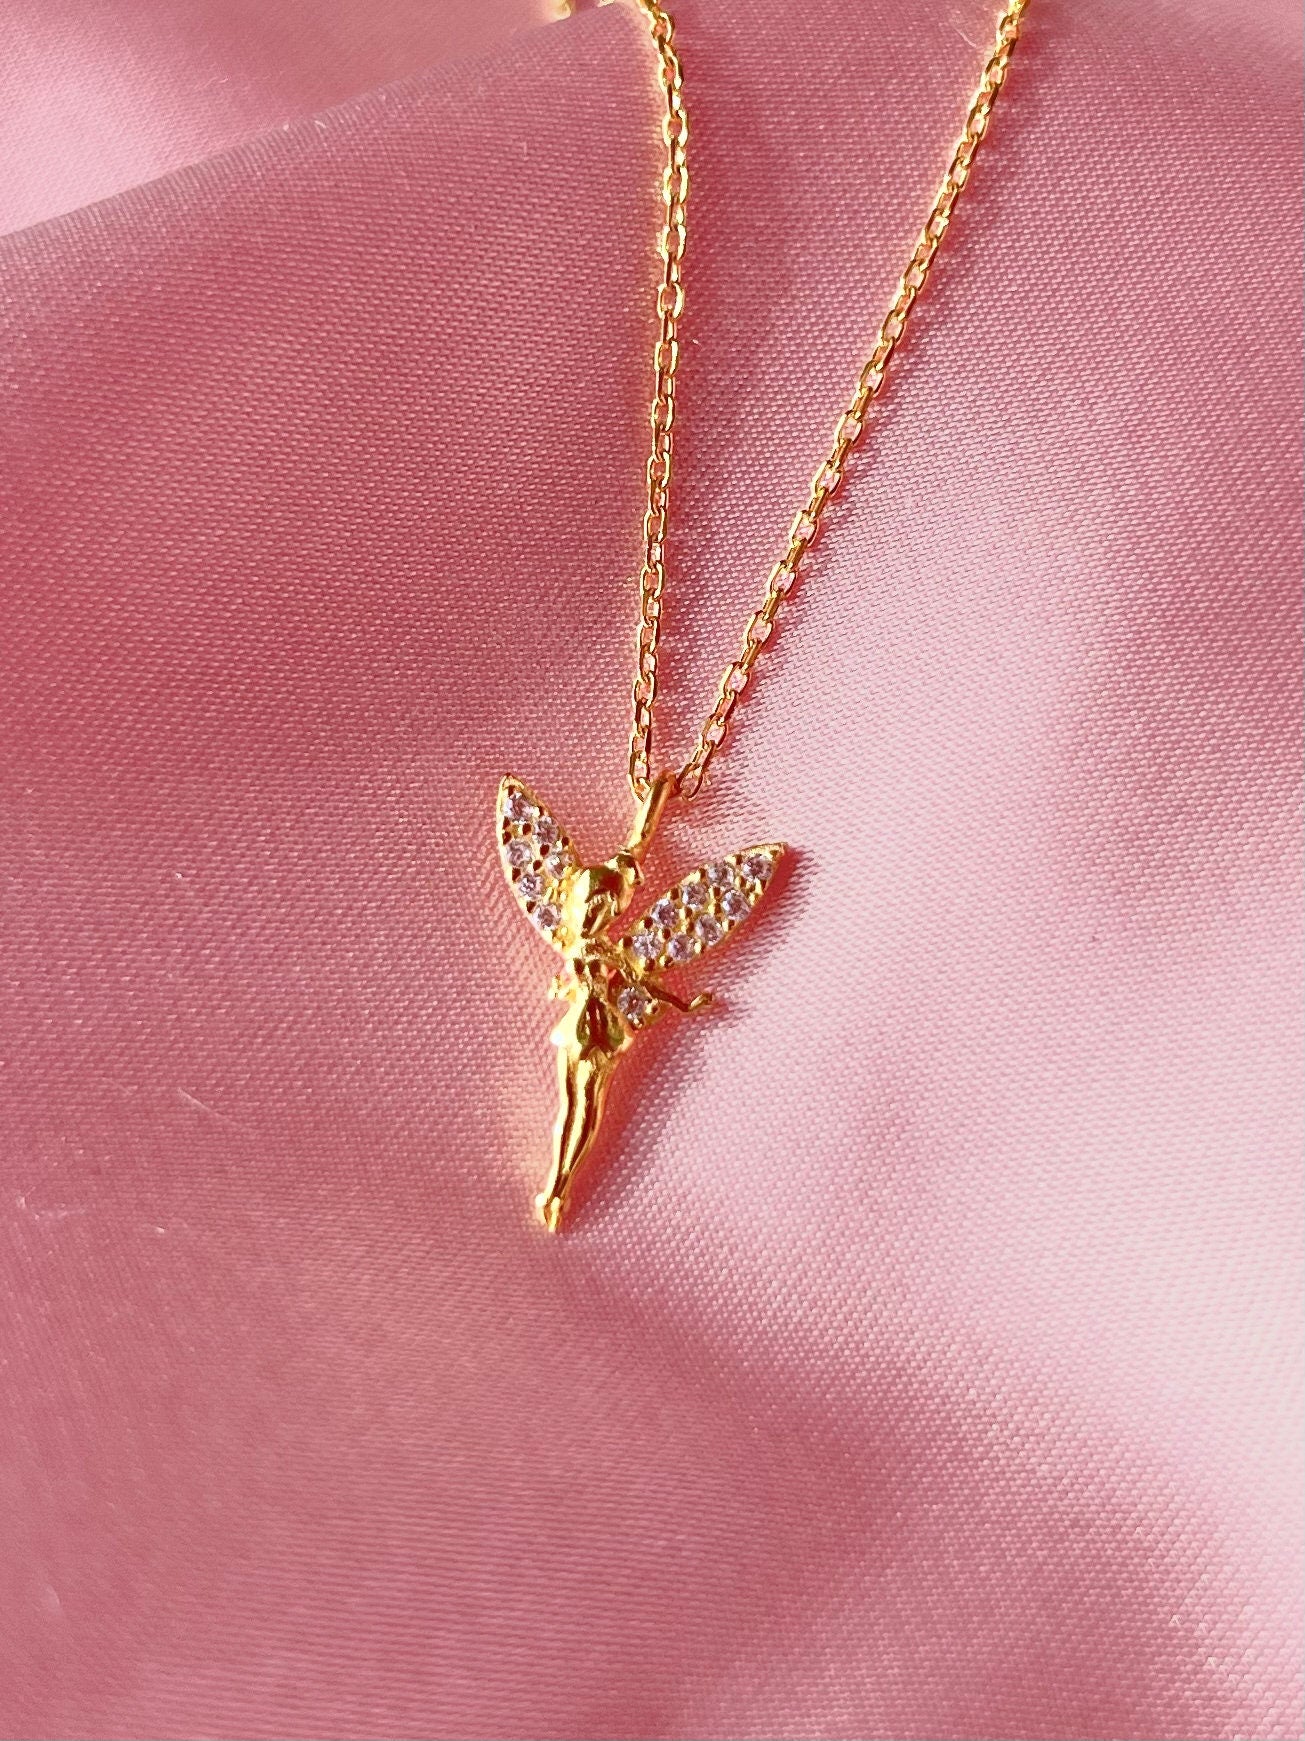 Tinker Bell Fairy Minimalist Necklace, Dainty Tinker Bell Rosetta Protagonists Pendant Gift for Peter Pan lover -925 Sterling Silver